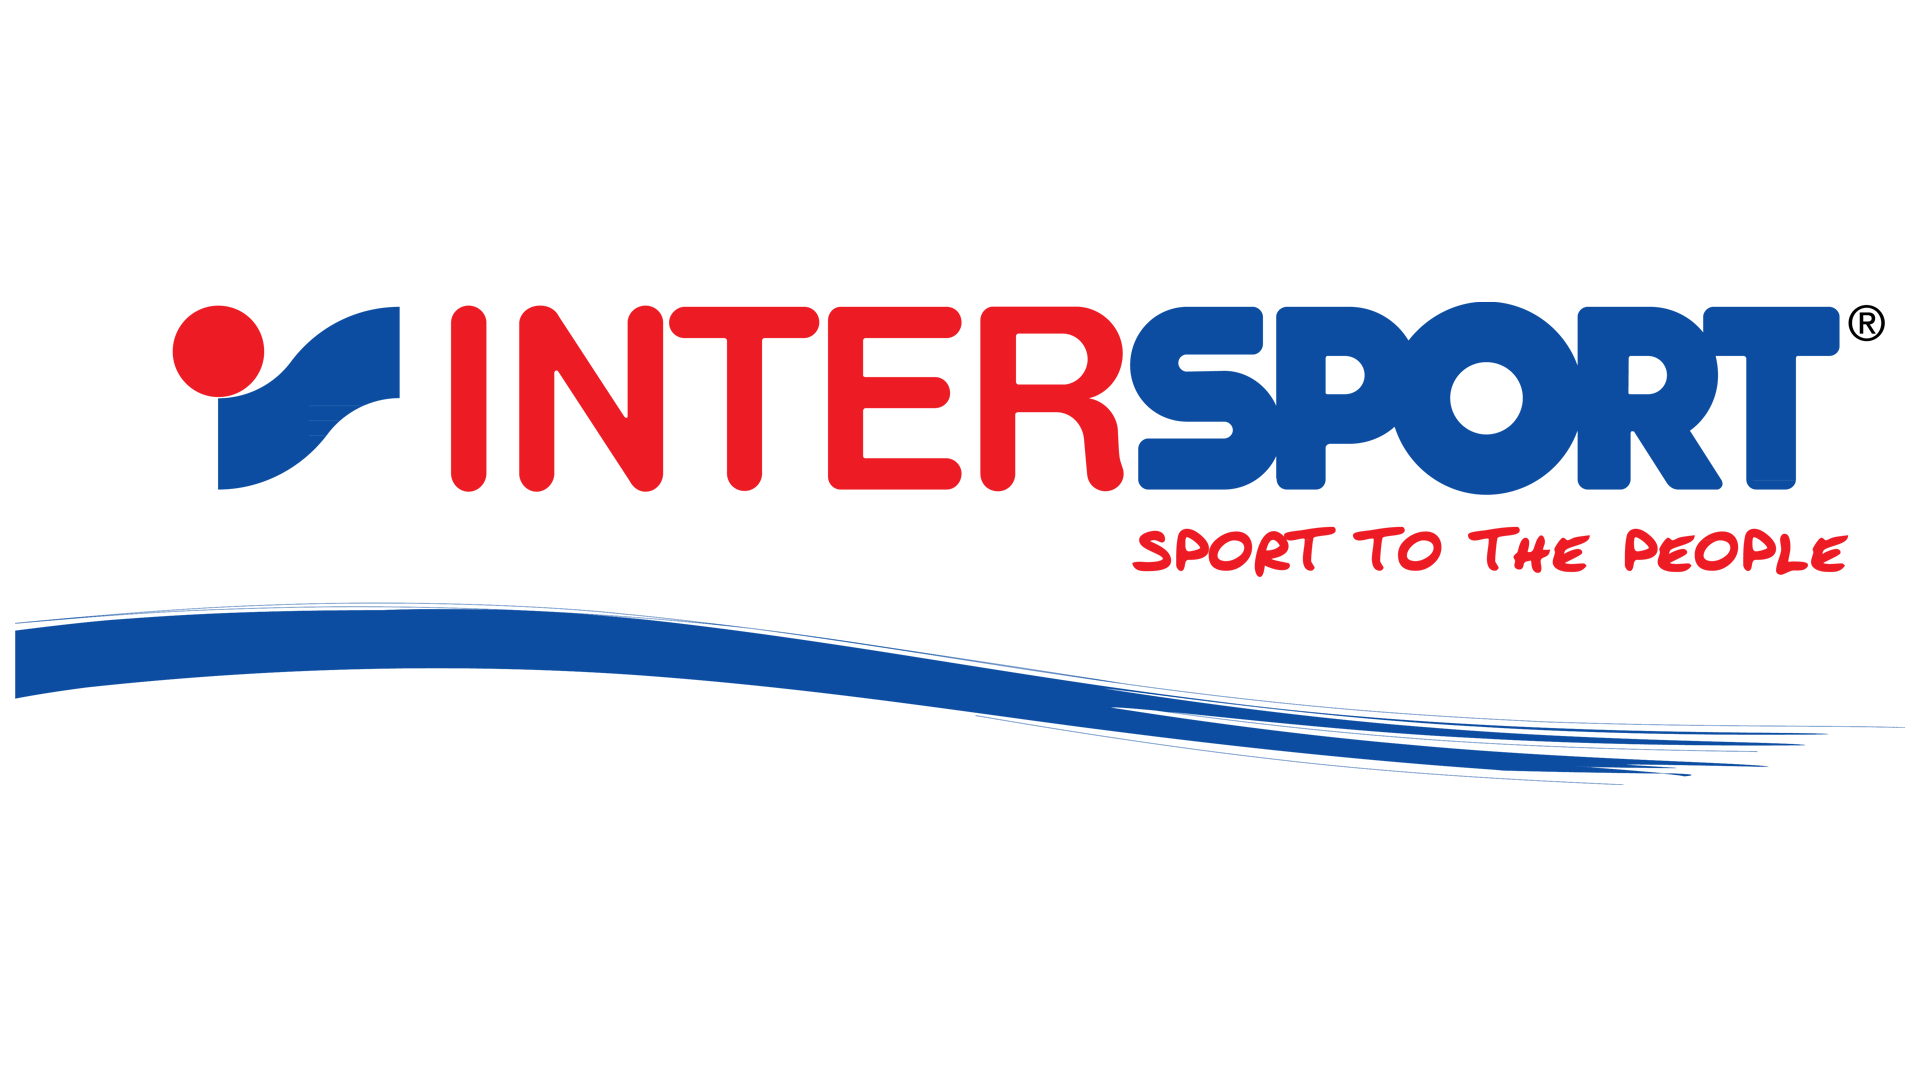 Well Known Sports Logo - Intersport Logo, Intersport Symbol, Meaning, History and Evolution